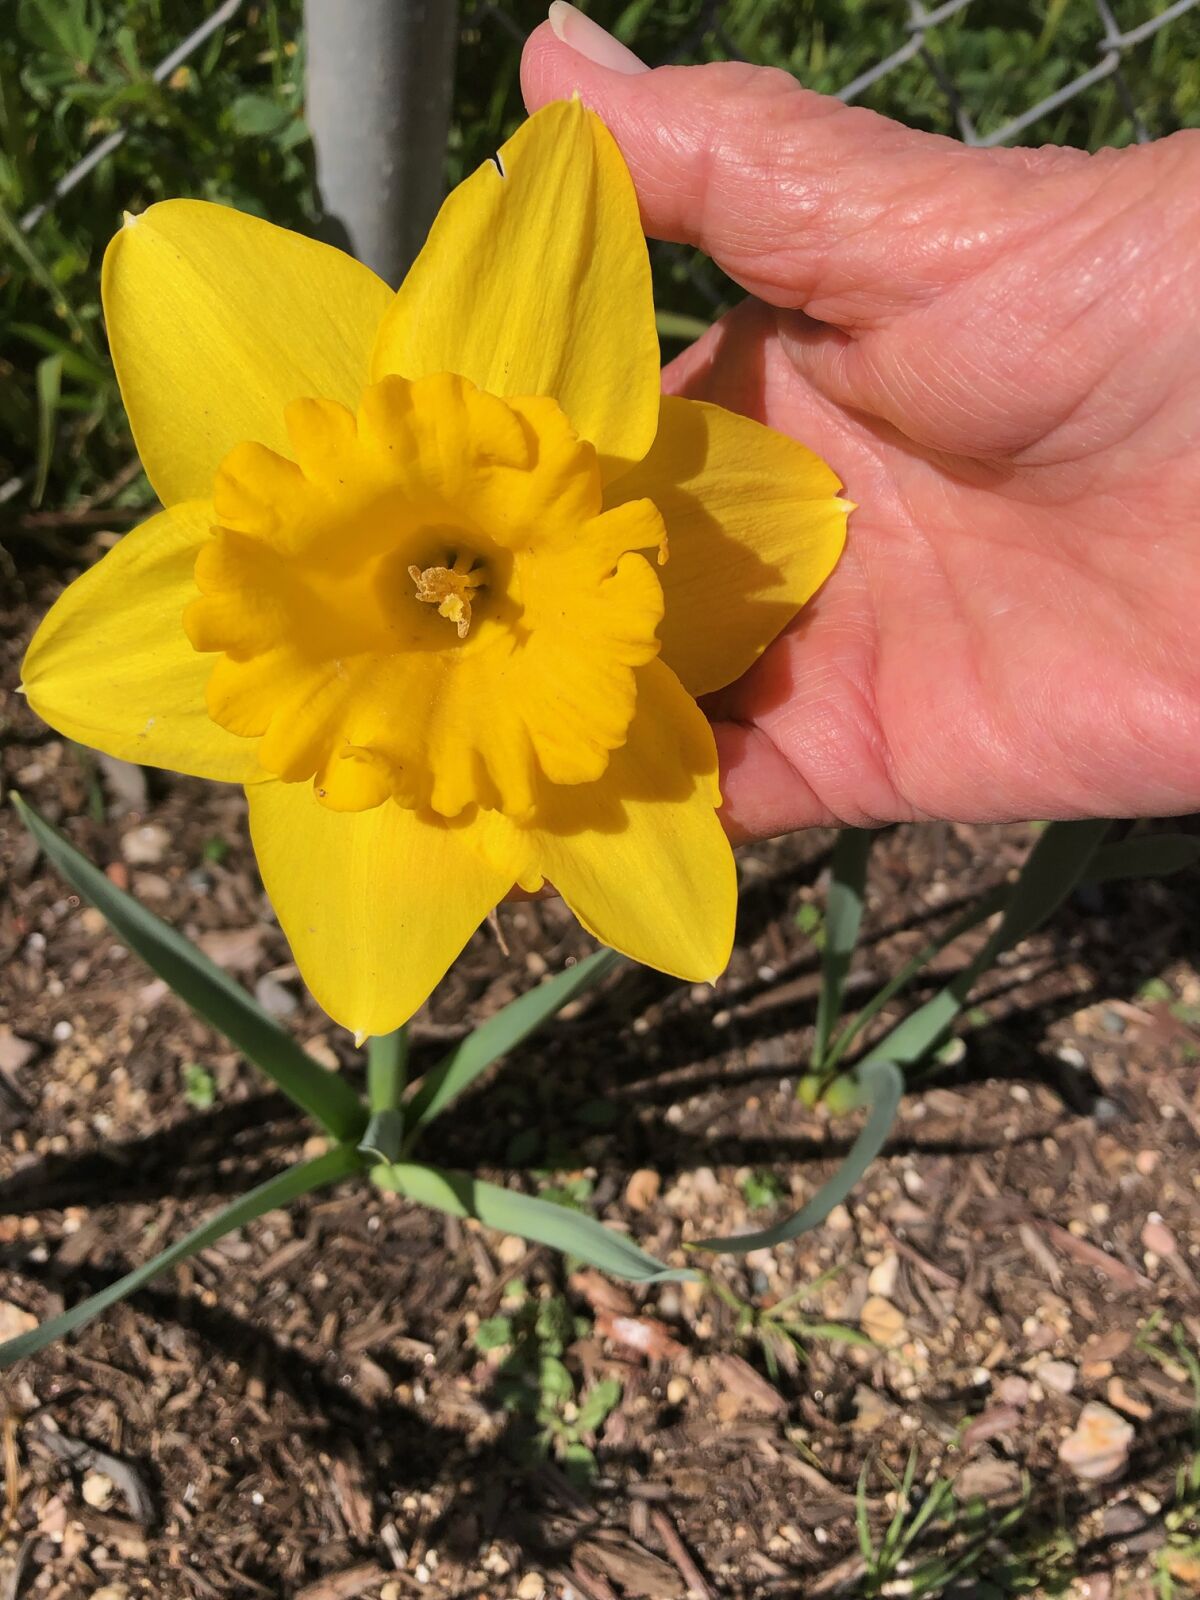 Kathie Farmer shared this photo of a daffodil grown from bulbs purchased at the Dollar Store in Ramona.